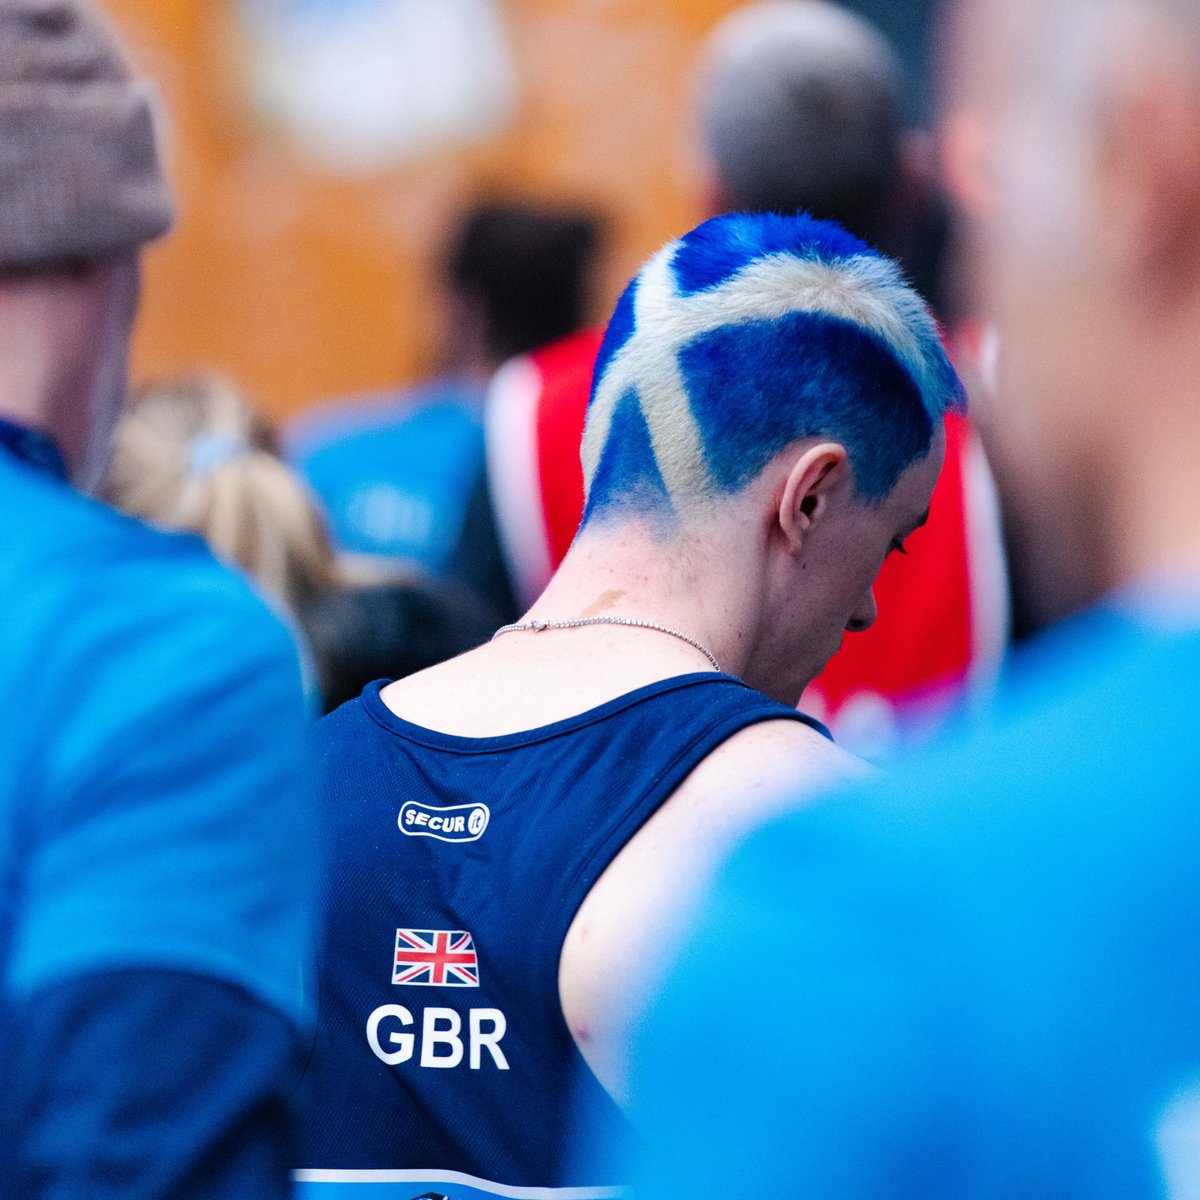 We’re off to Edinburgh! 🏴󠁧󠁢󠁳󠁣󠁴󠁿 ⁠ Next month we’re up north at the UK's largest climbing arena, @eicaratho, for the British Lead, Speed, and Para Champs- and you can join us!⁠ ⁠ All you need to know can be found here: bit.ly/3KHNBxK ⁠⁠ #britishclimbingchampionships⁠